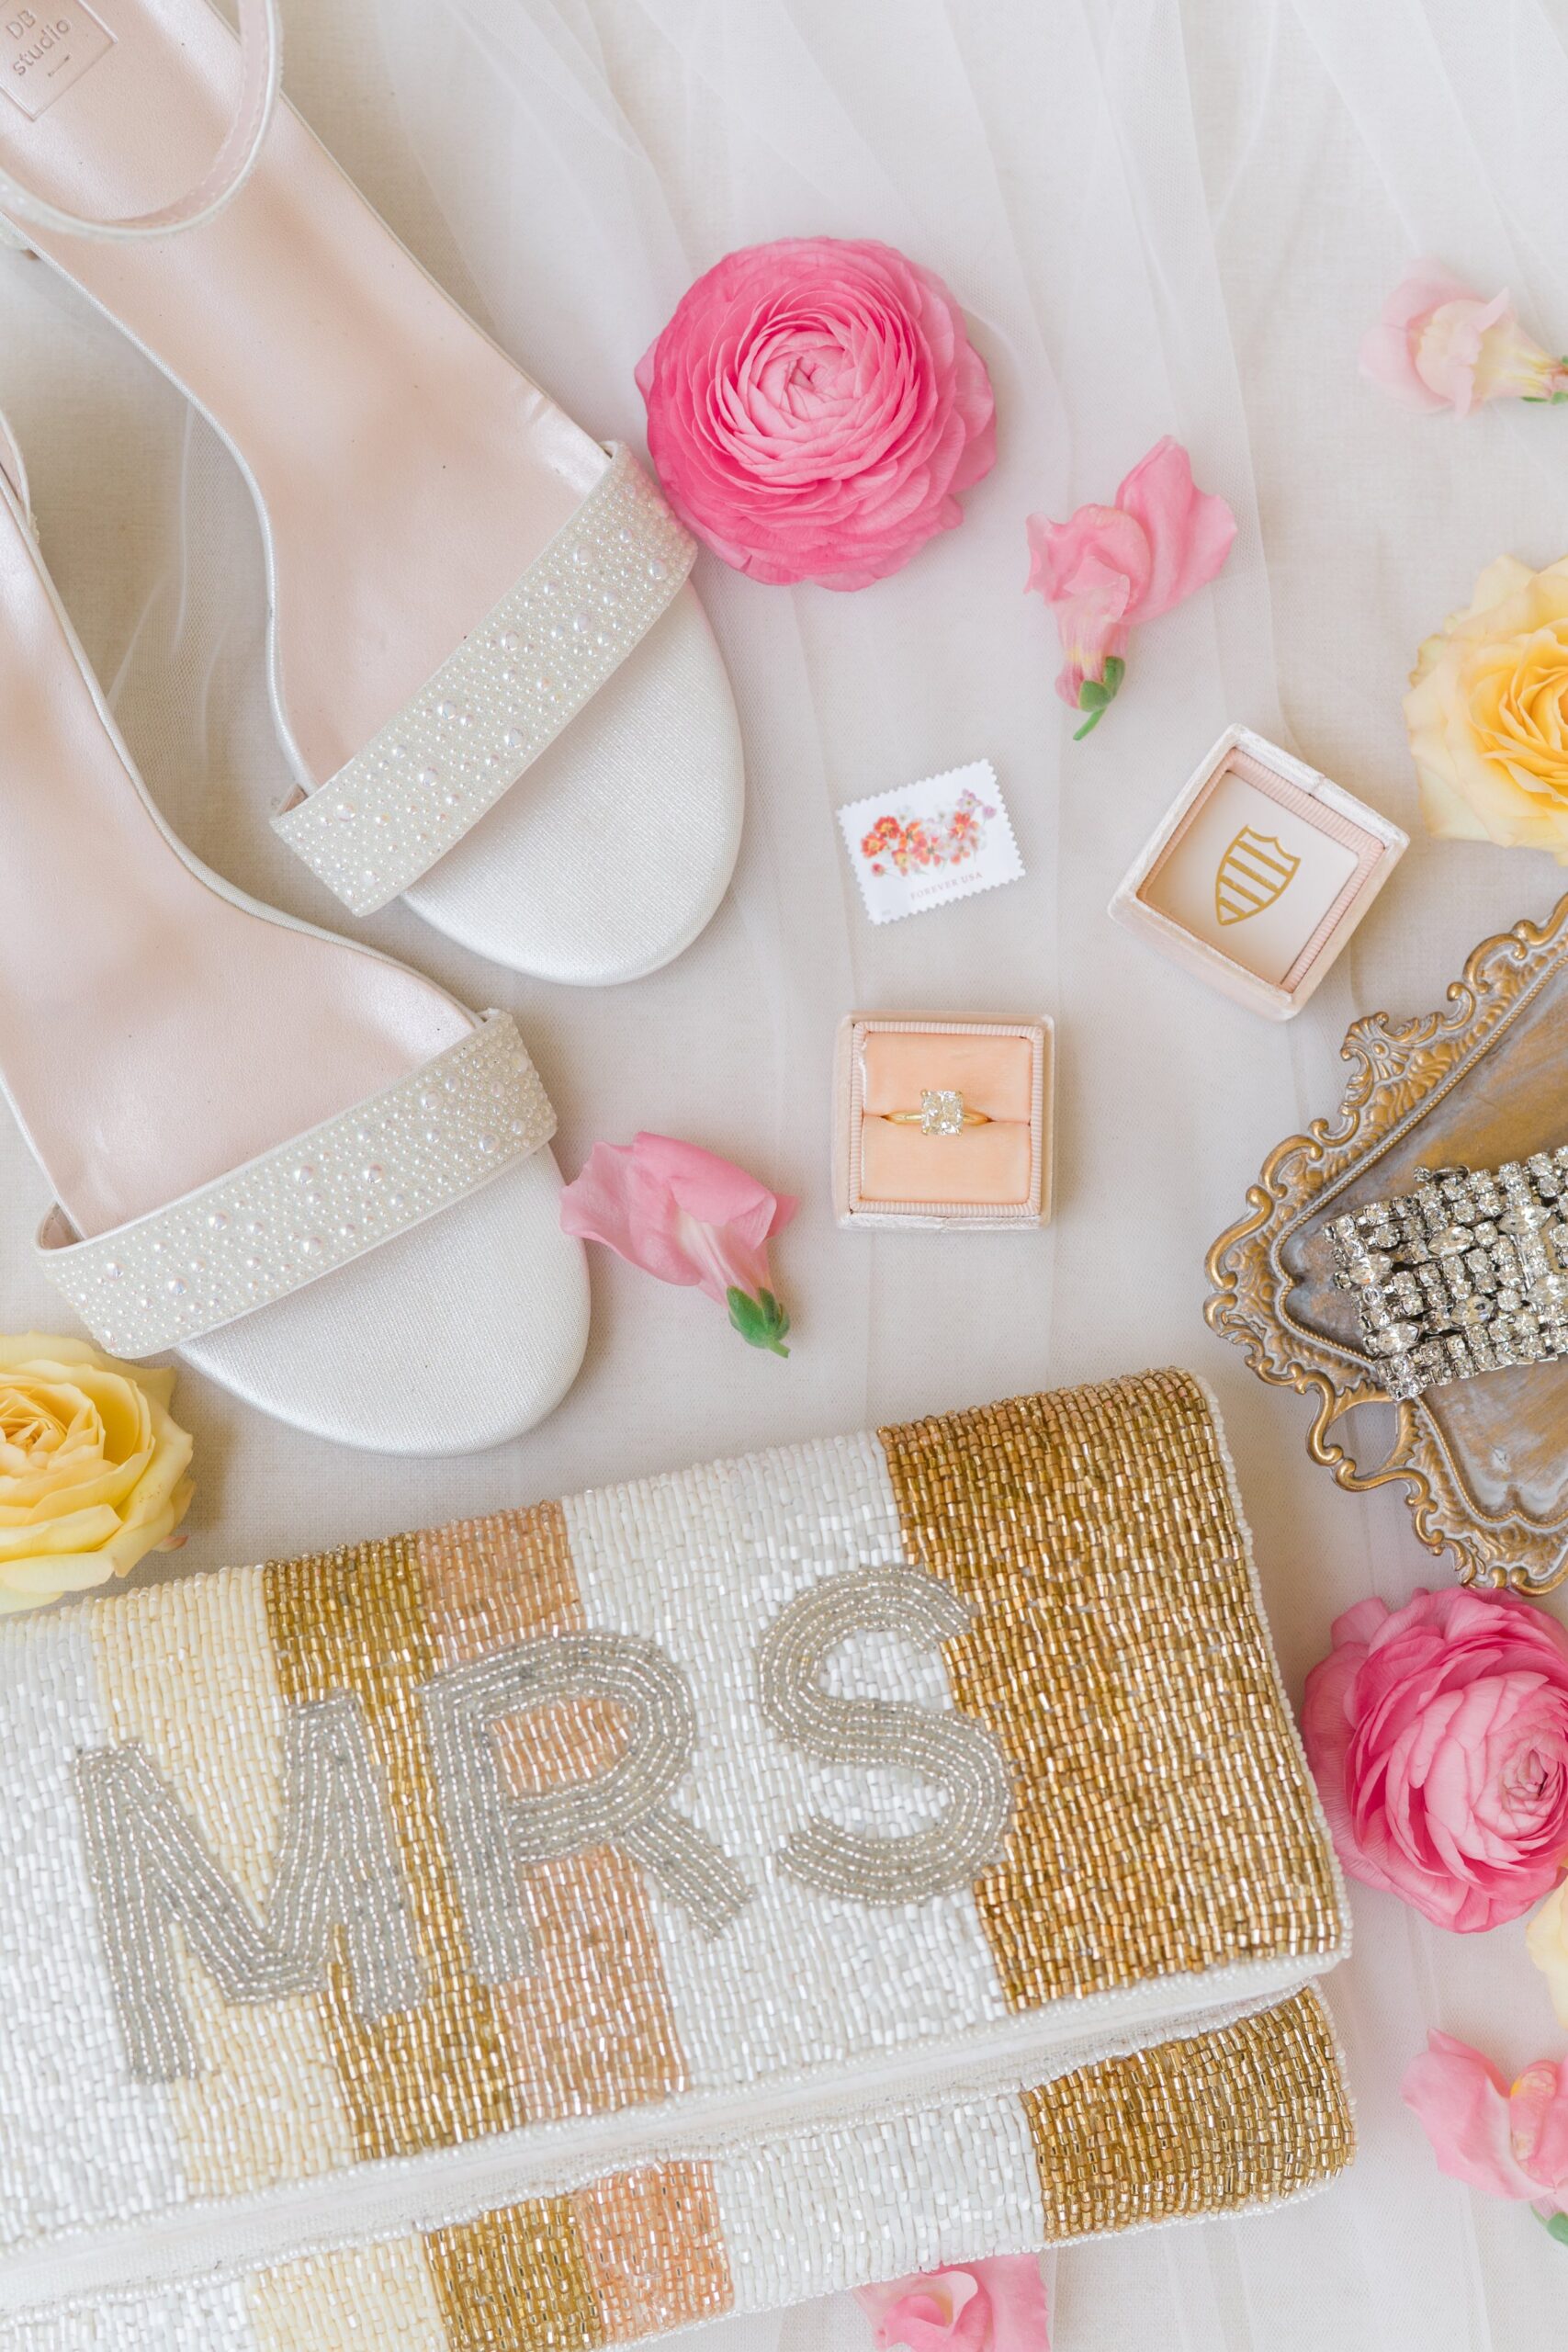 bride details with pink flowers and mrs. clutch purse